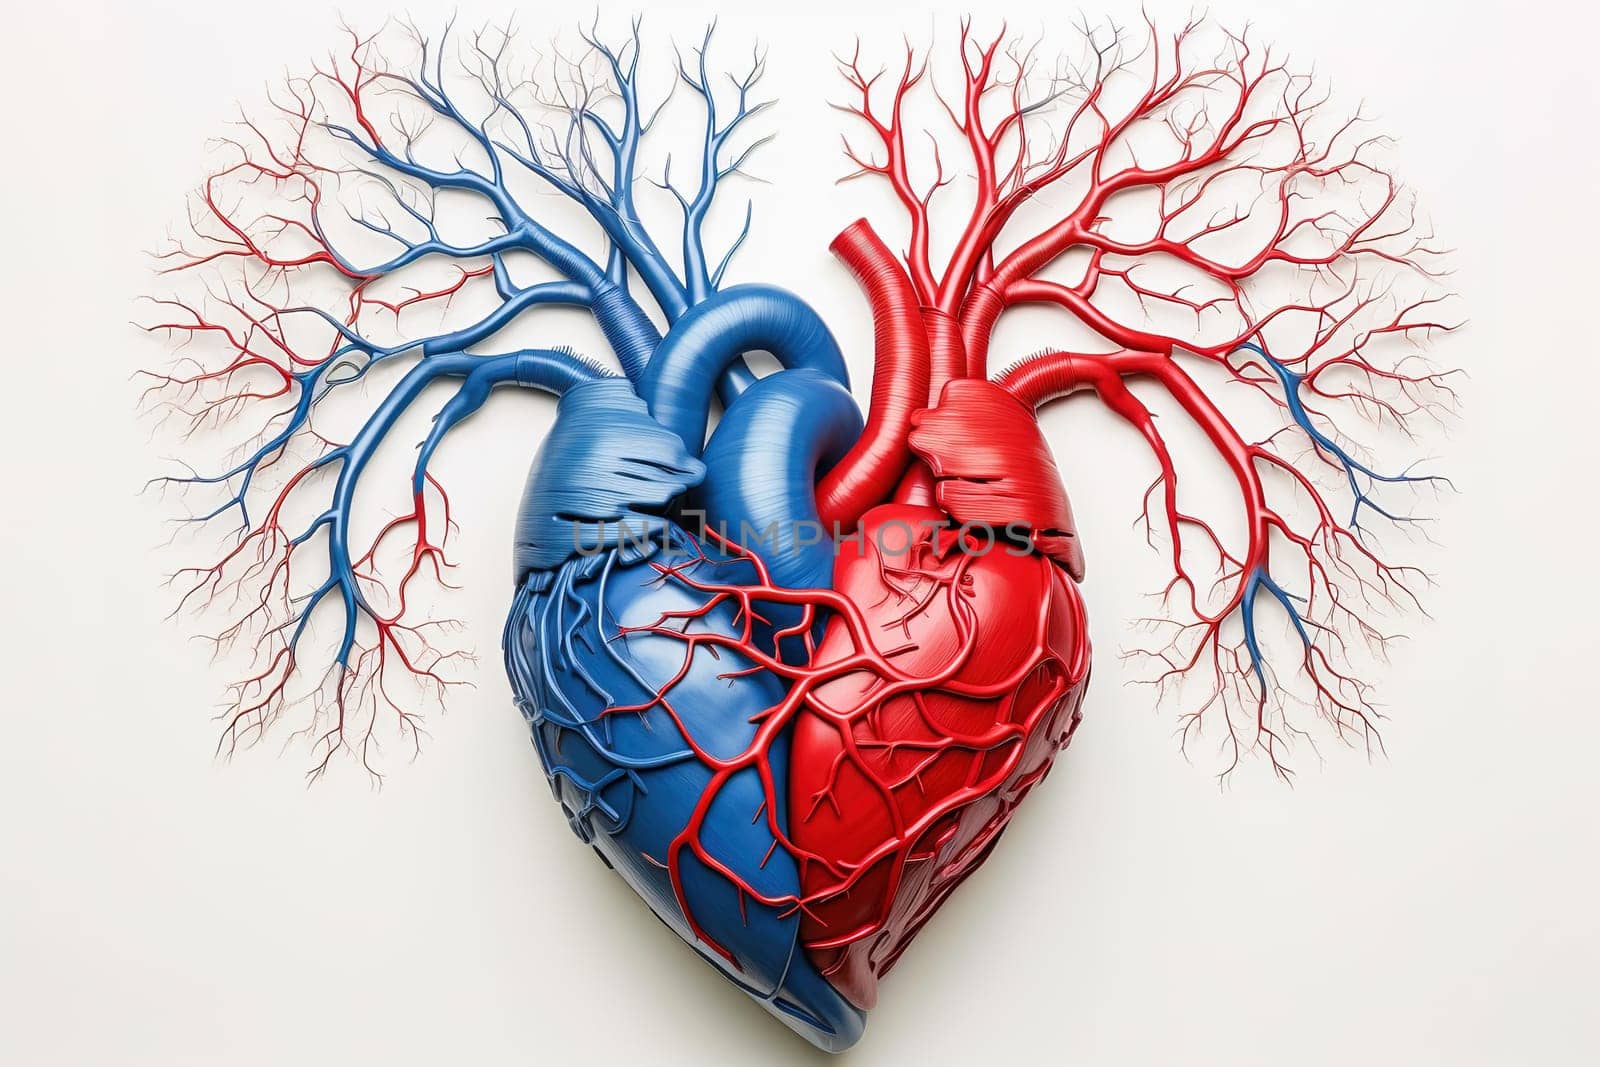 Red and blue model of a human heart. Heart care concept. High quality illustration